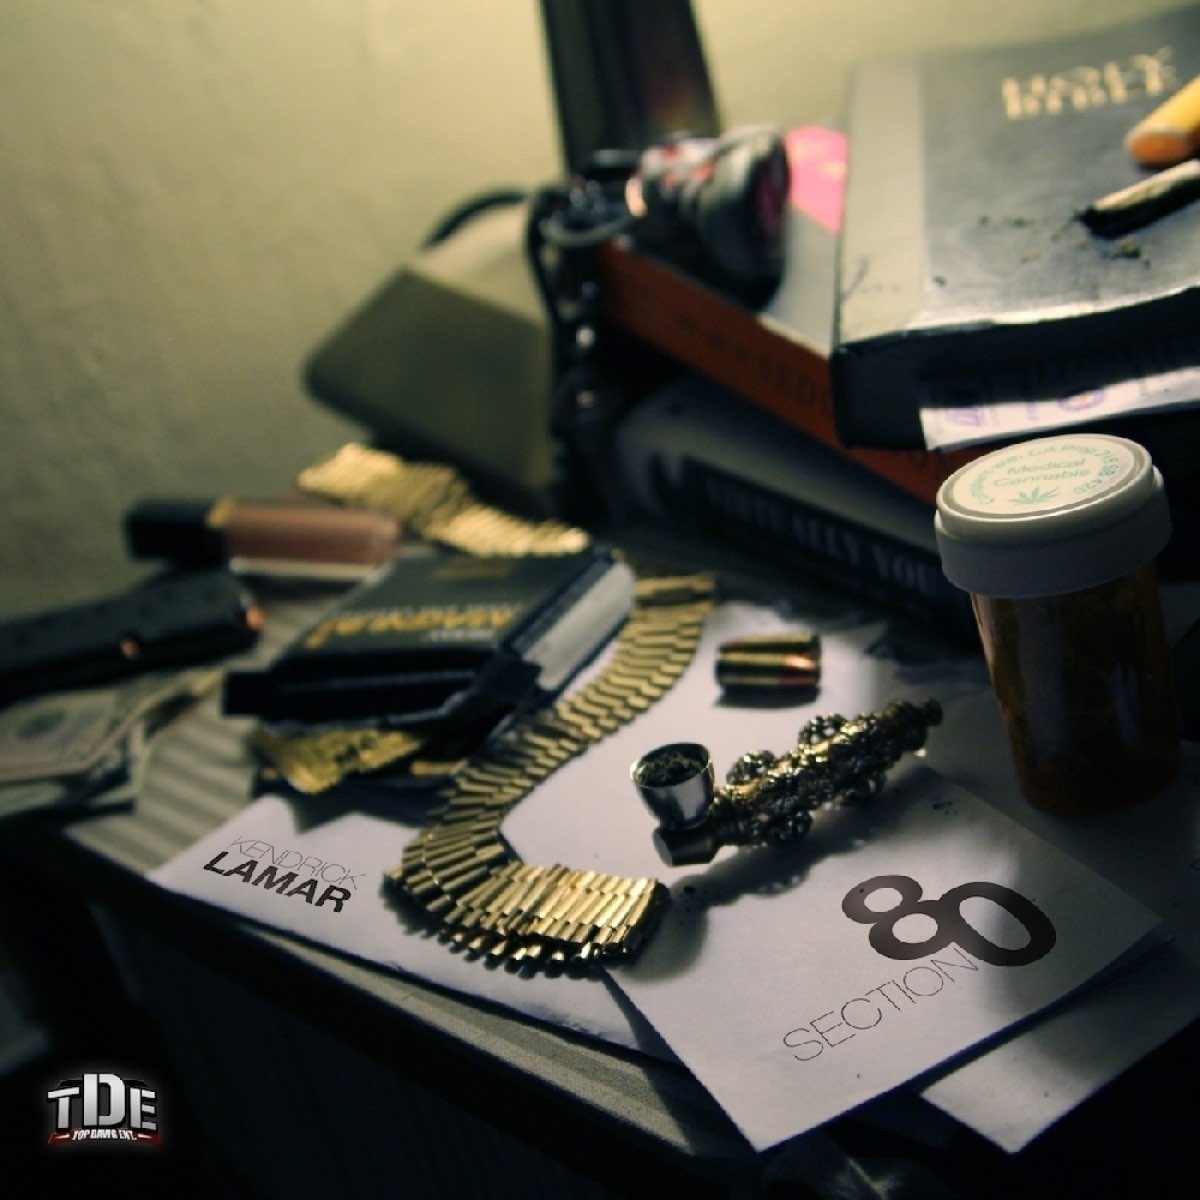 section-80-by-kendrick-lamar-on-apple-music